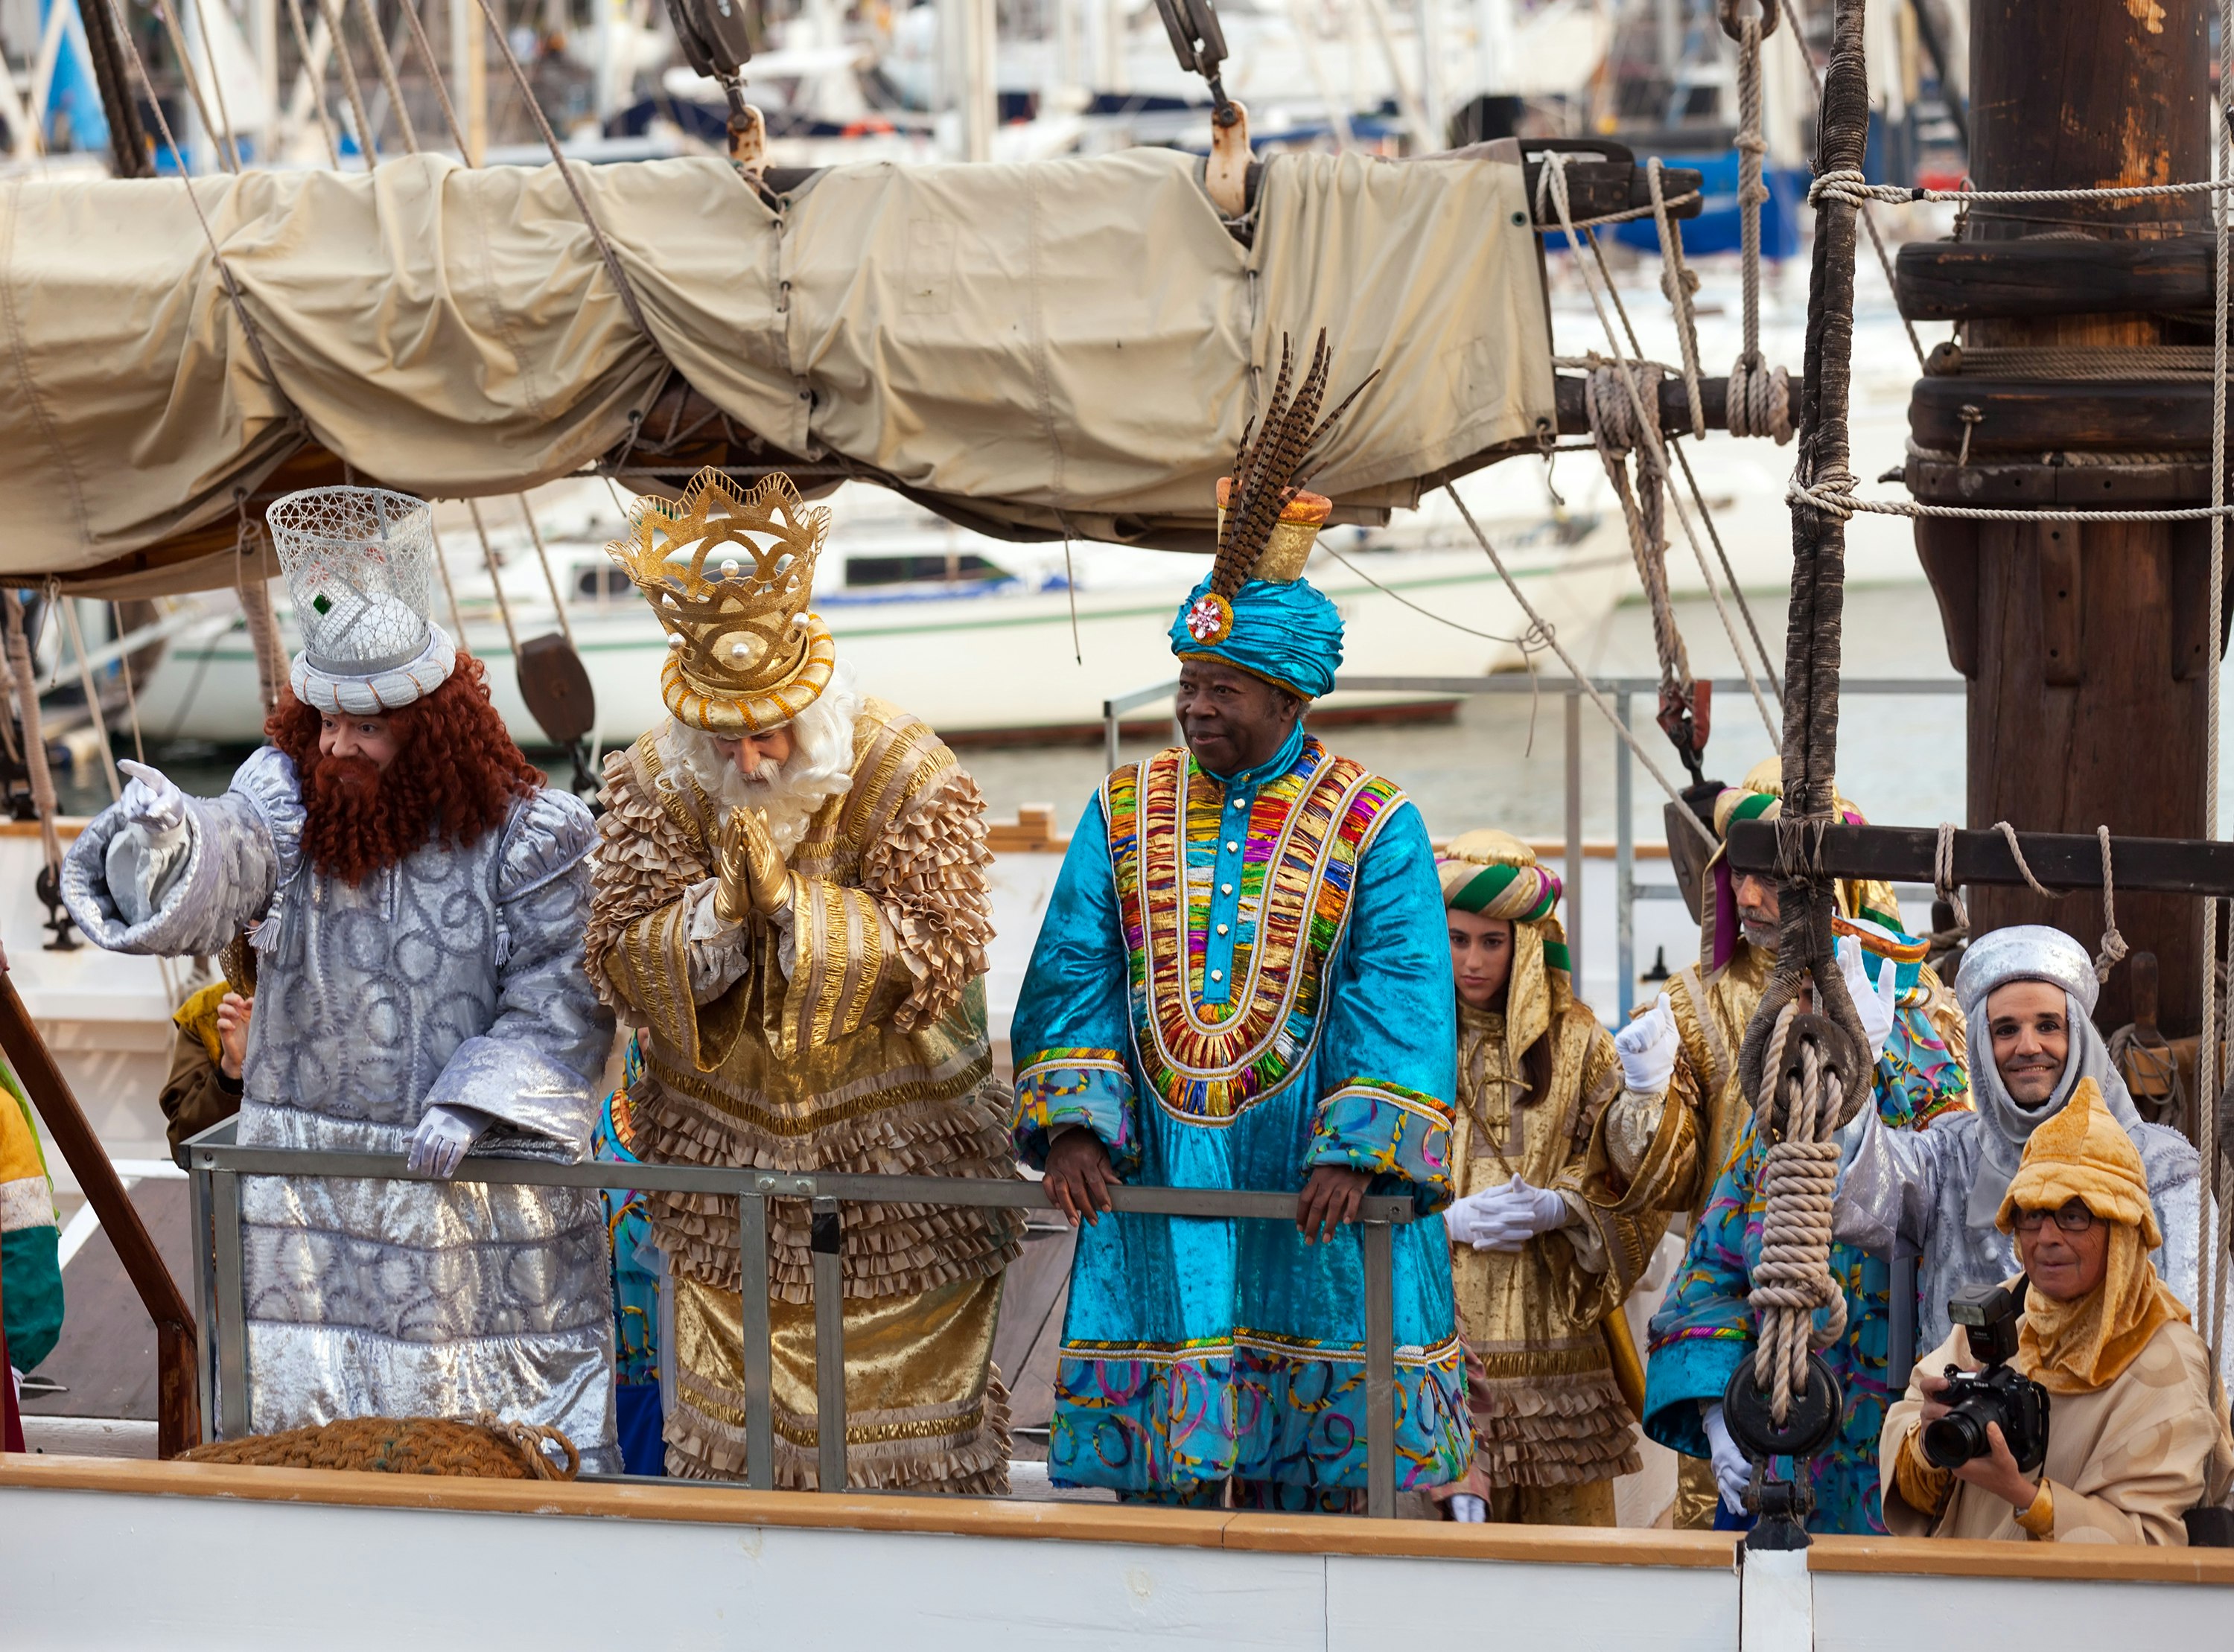 Men dressed as the Three Kings in elaborate outfits stand on a boat on Kings Day in Barcelona, with their subjects behind them.